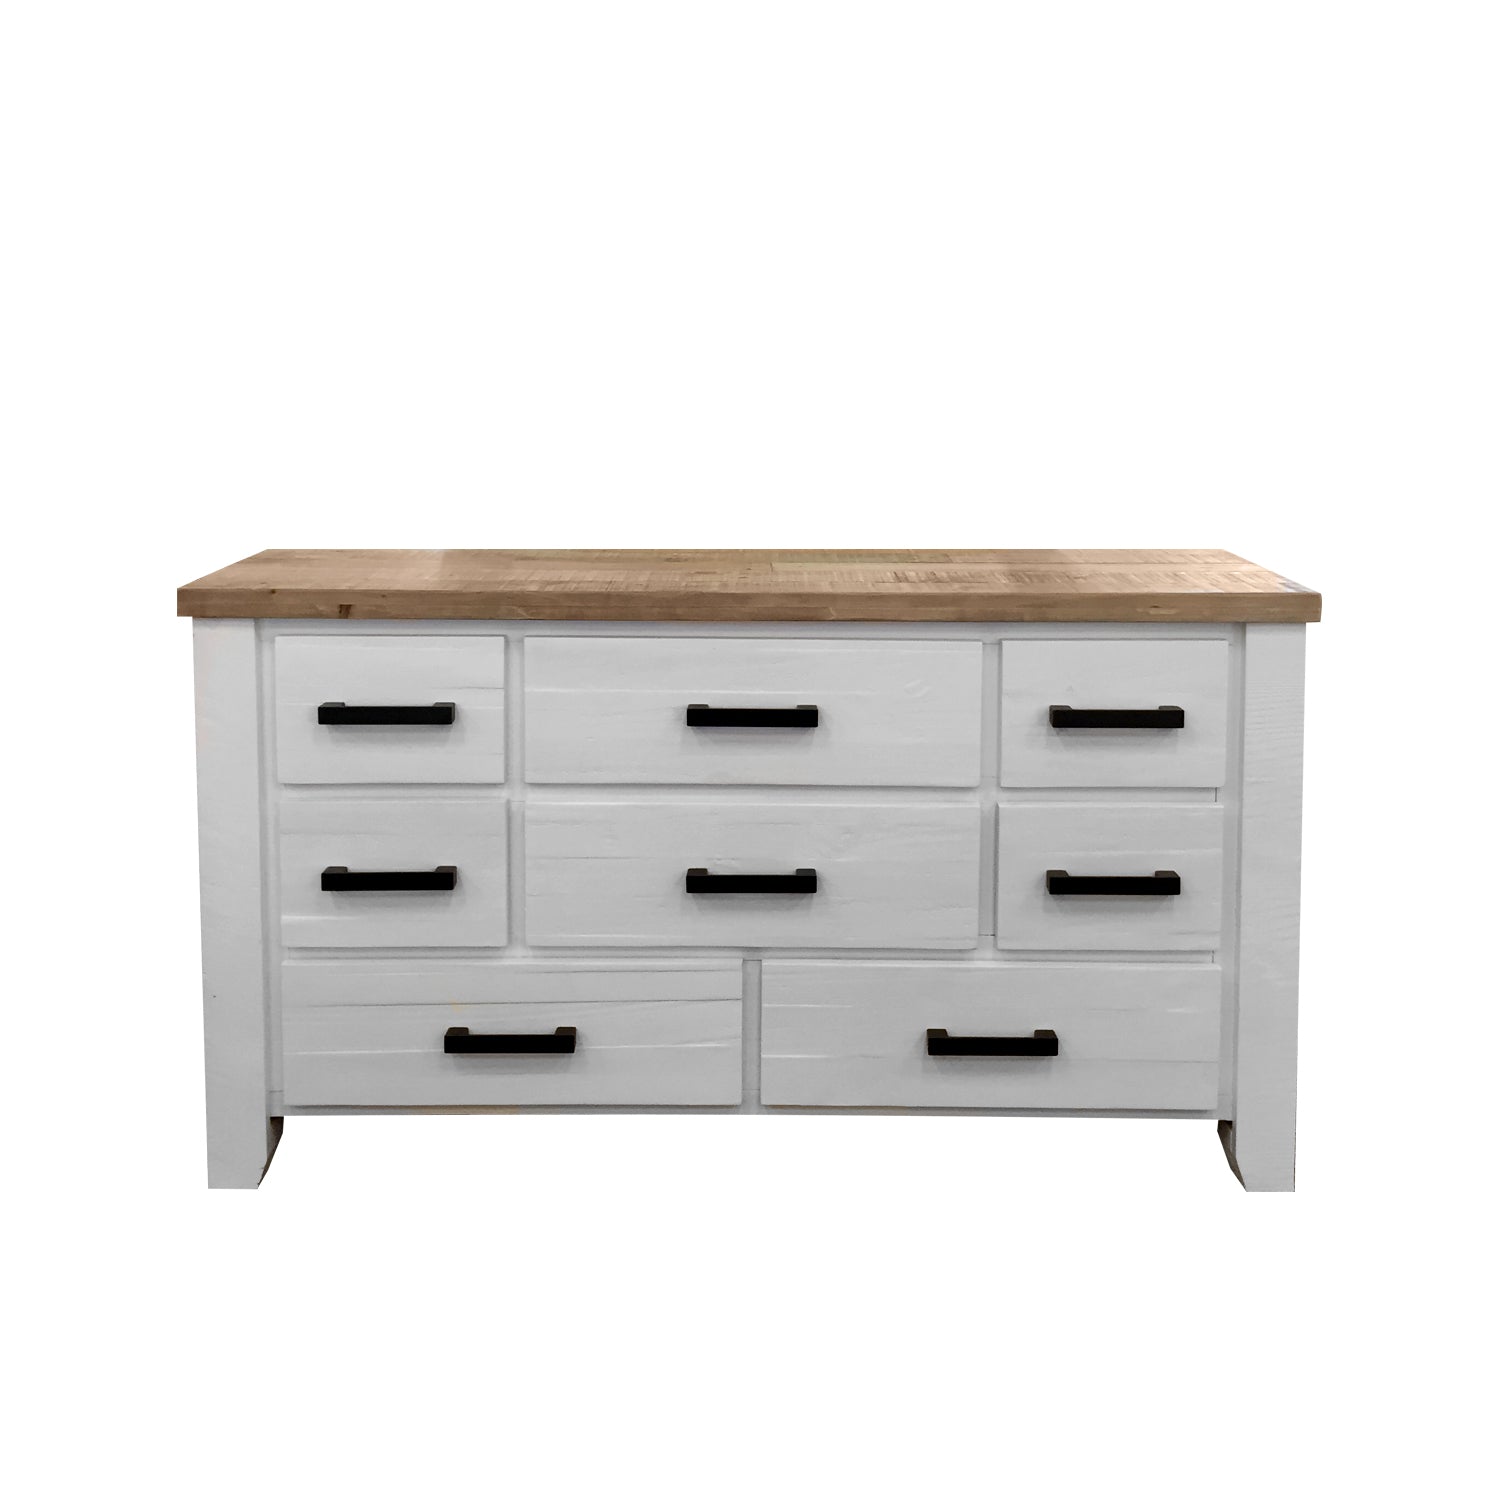 Harlow Dresser 8 Drawer The Furniture Store The Bed Shop